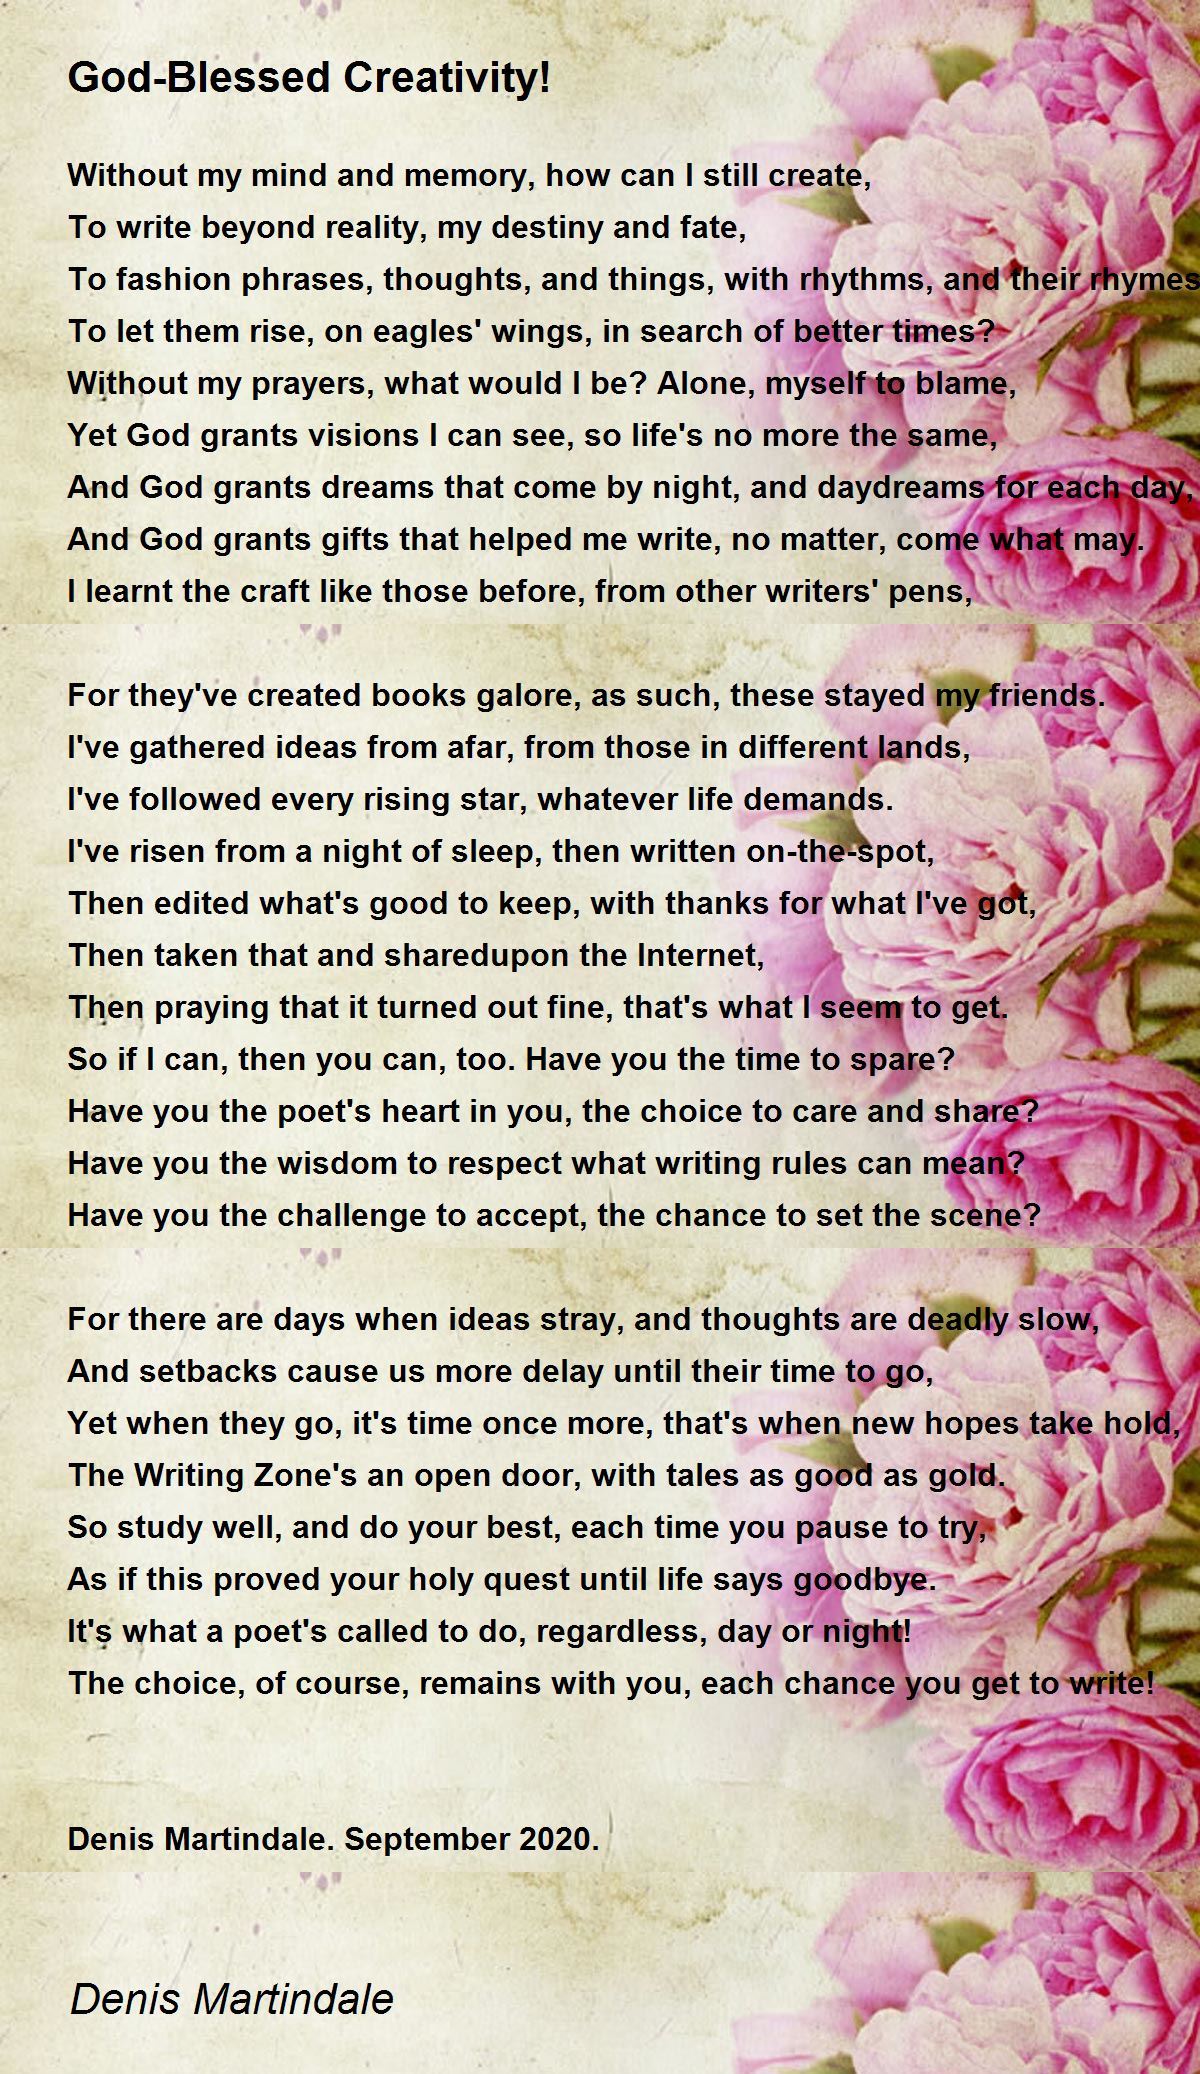 God-Blessed Creativity! - God-Blessed Creativity! Poem by Denis Martindale